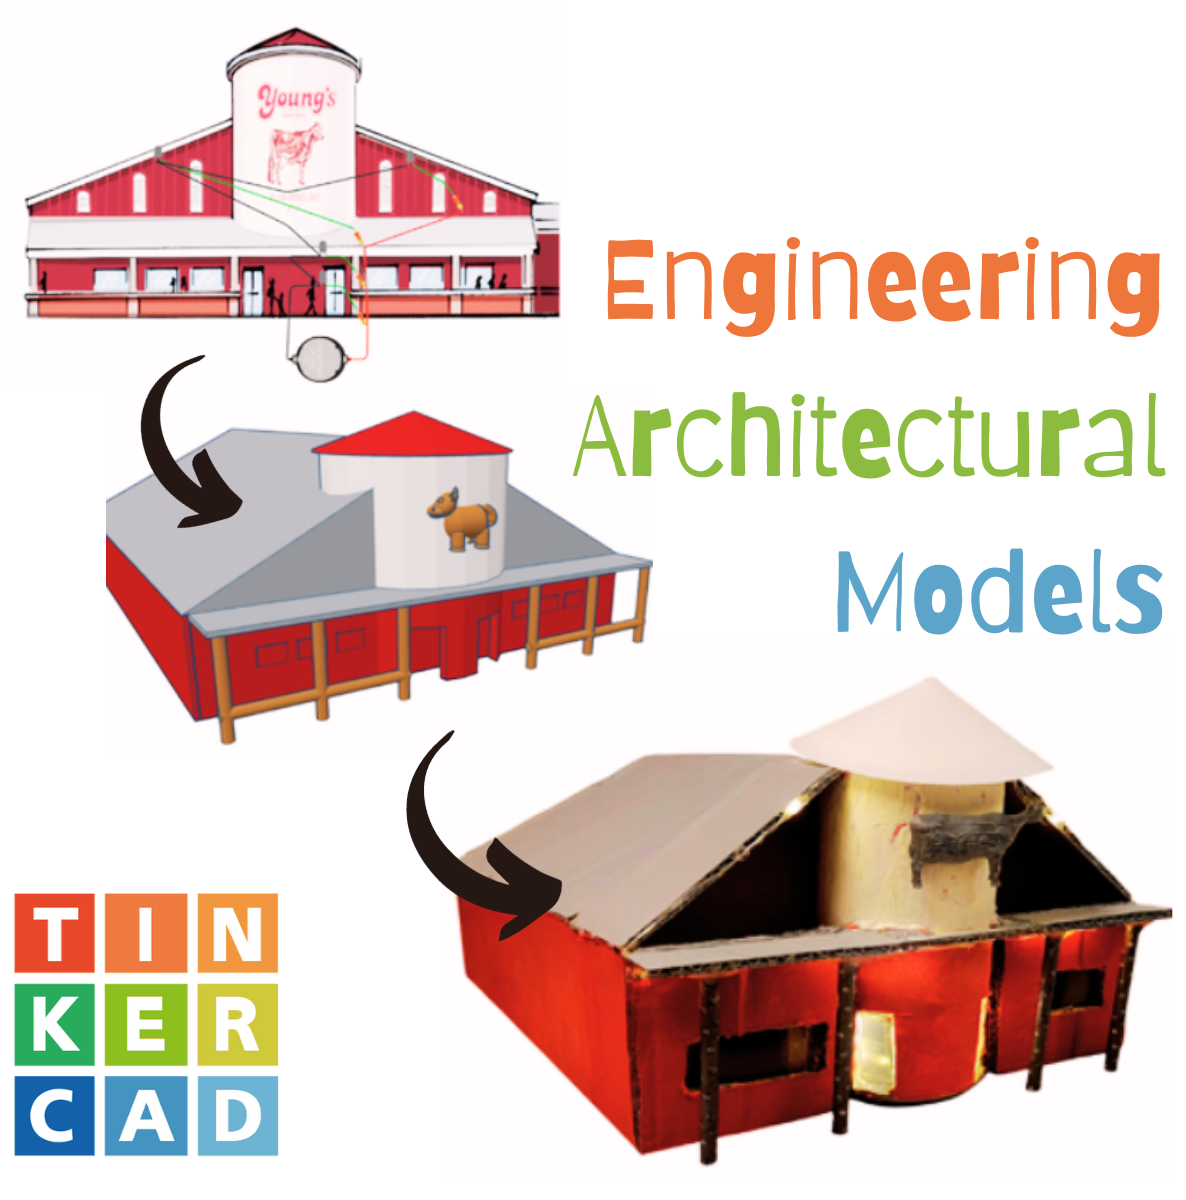 Engineering Architectural Models